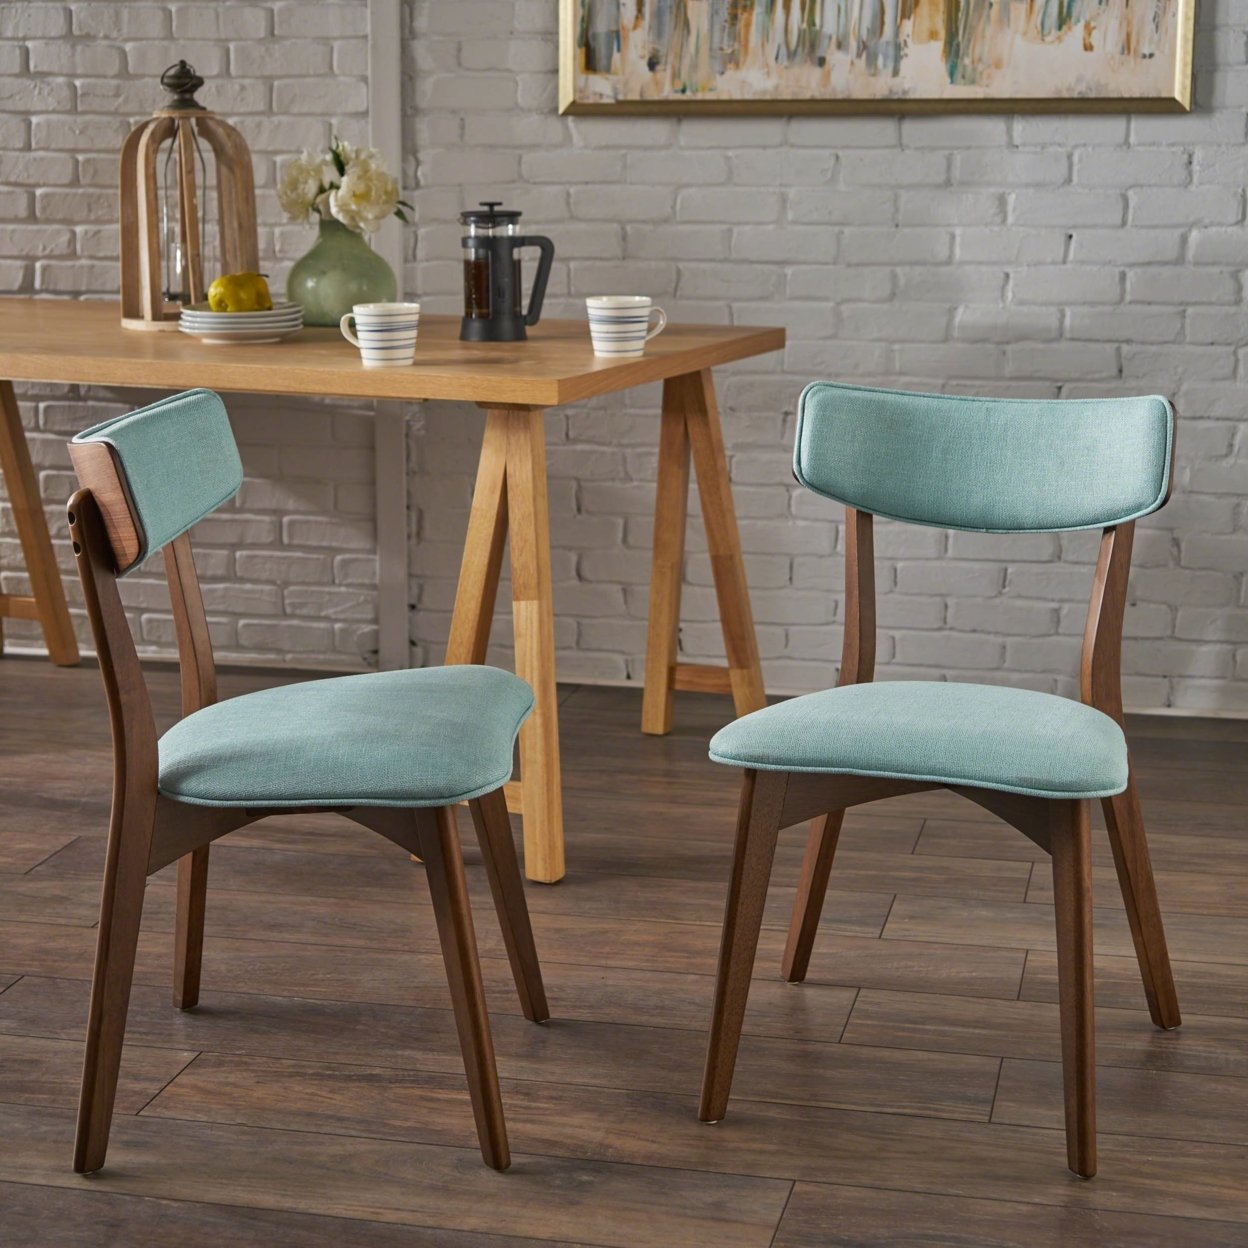 Molly Mid Century Modern Dining Chairs With Rubberwood Frame (Set Of 2) - Mint/Natural Walnut